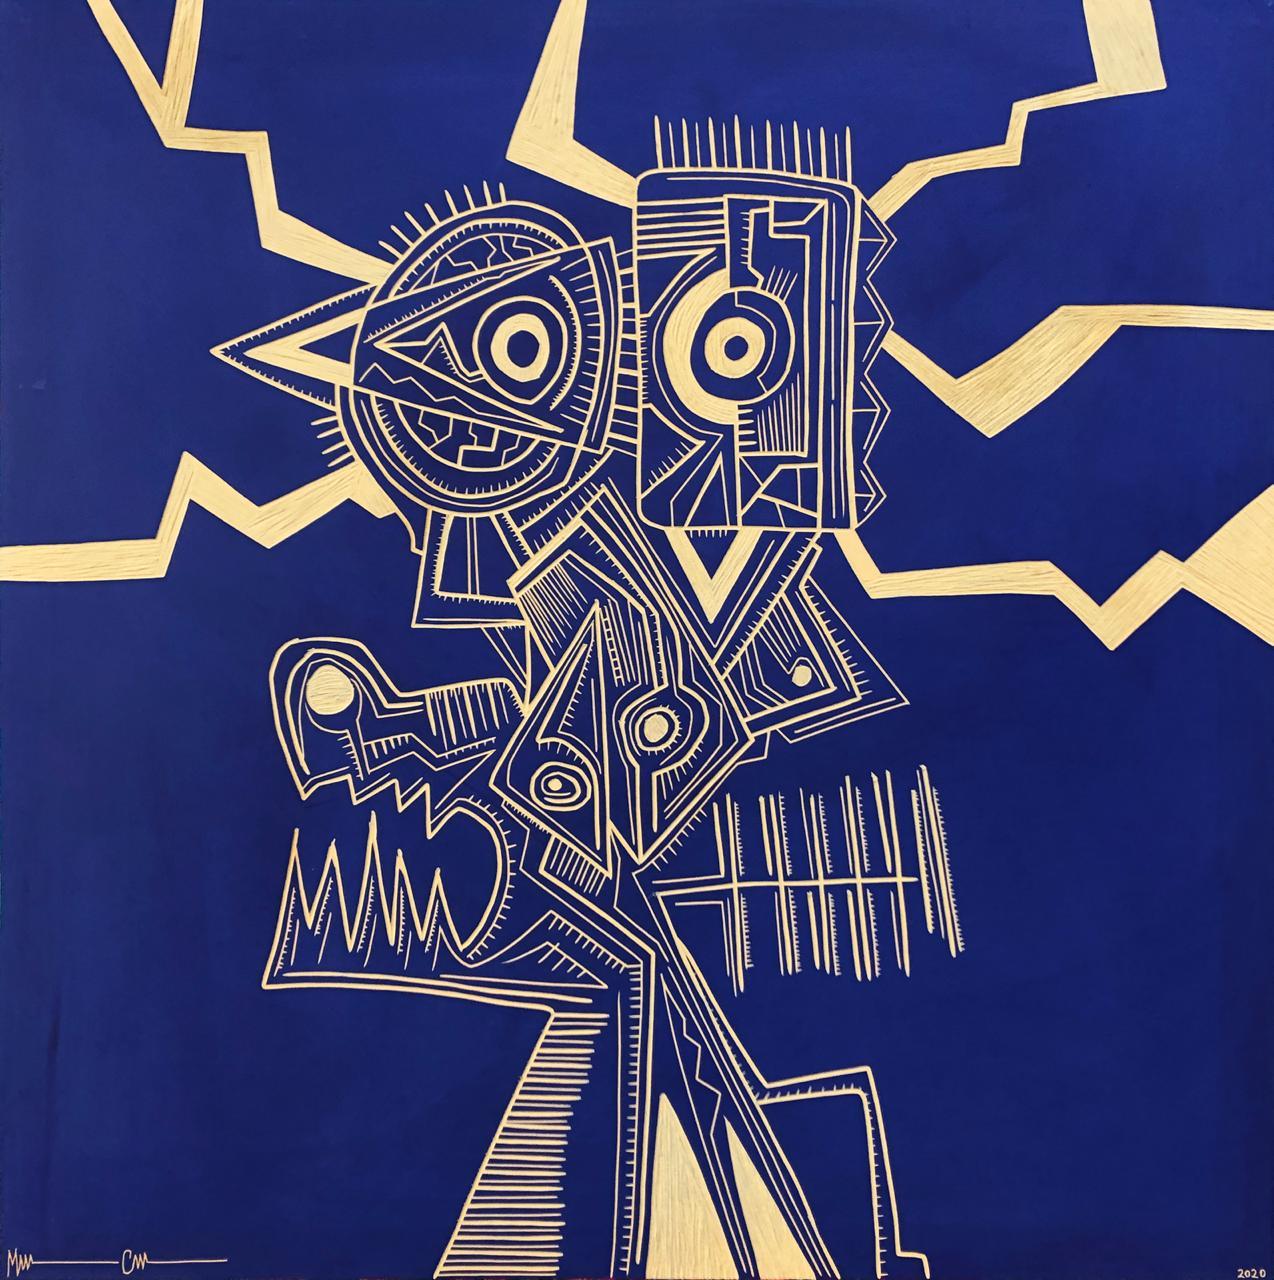 Contemporary Art
Mixed media on wood
Signed and dated

About the artist
Cuauhtemoc´s work is the meeting point of the inevitable and the immovable, mixing senses and invoking the myth of chaos and pleasure. His work lacks norms, carving faces and